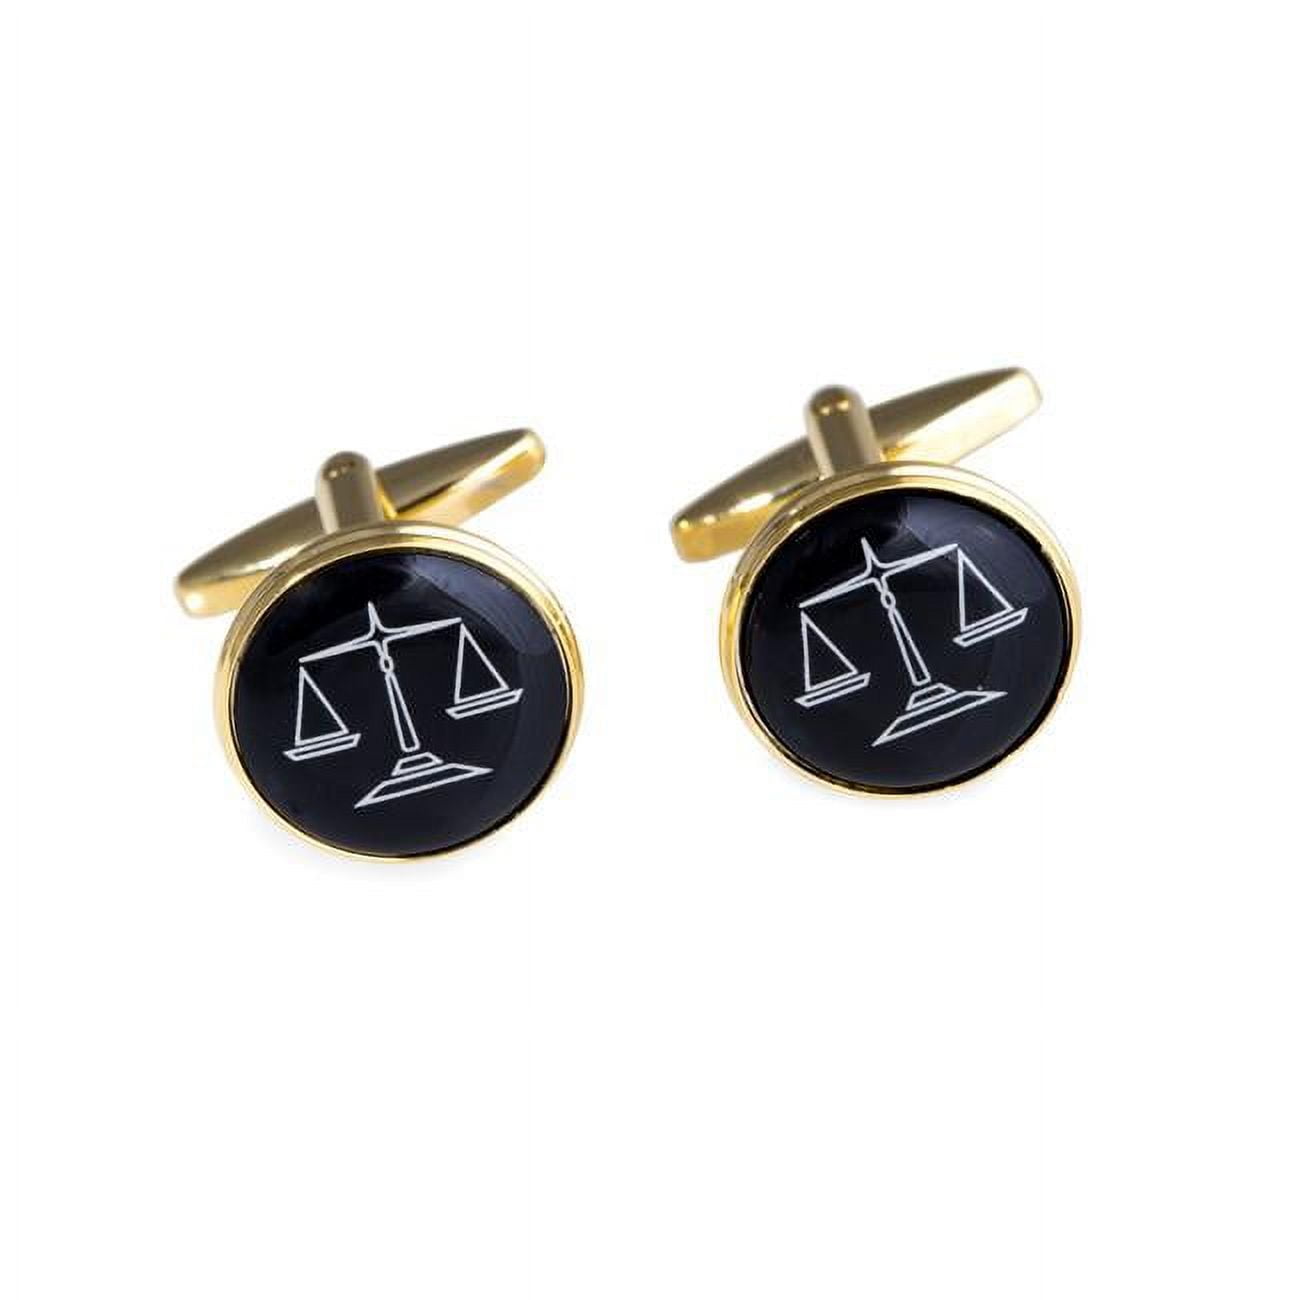 Picture of Bey-Berk International J174 Gold Plated Round Cufflinks with Scales Design